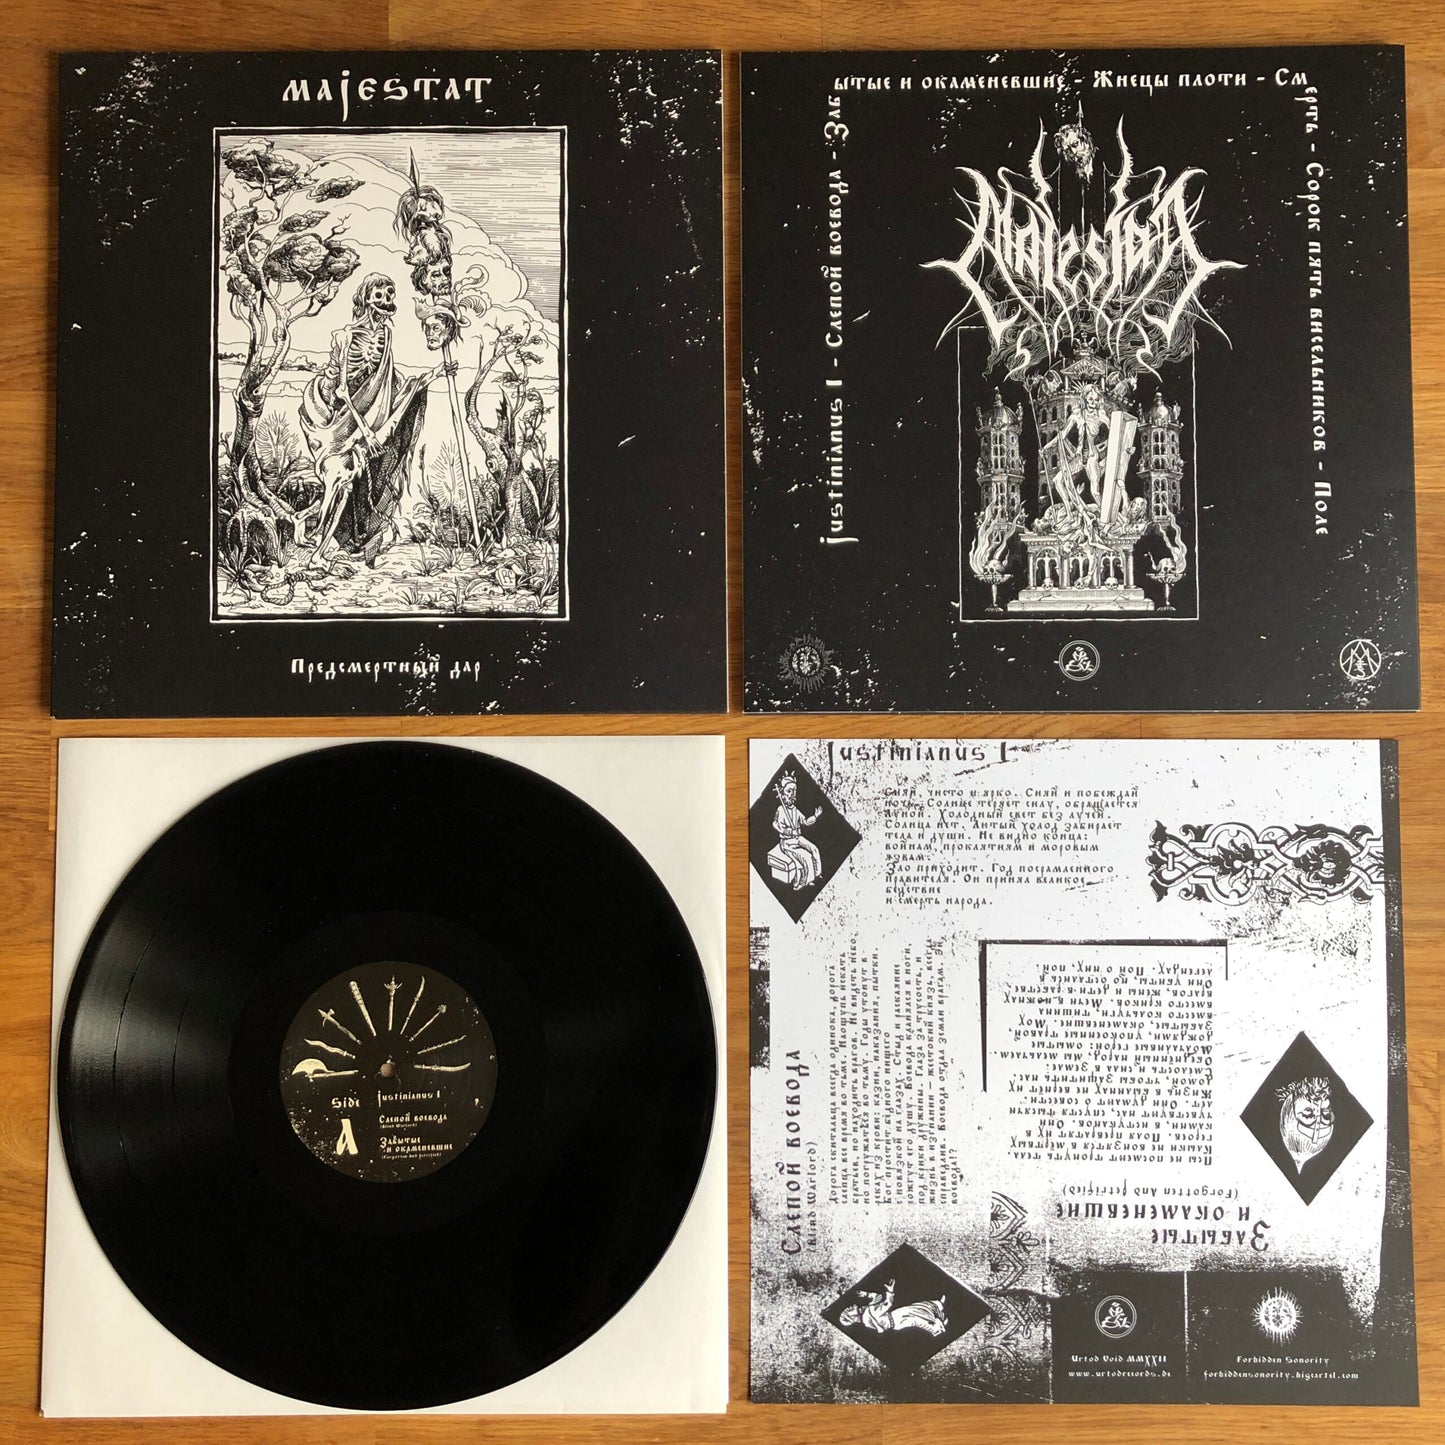 Taranis (Pol) "The Obscurity" - 12" LP  *New in Stock*